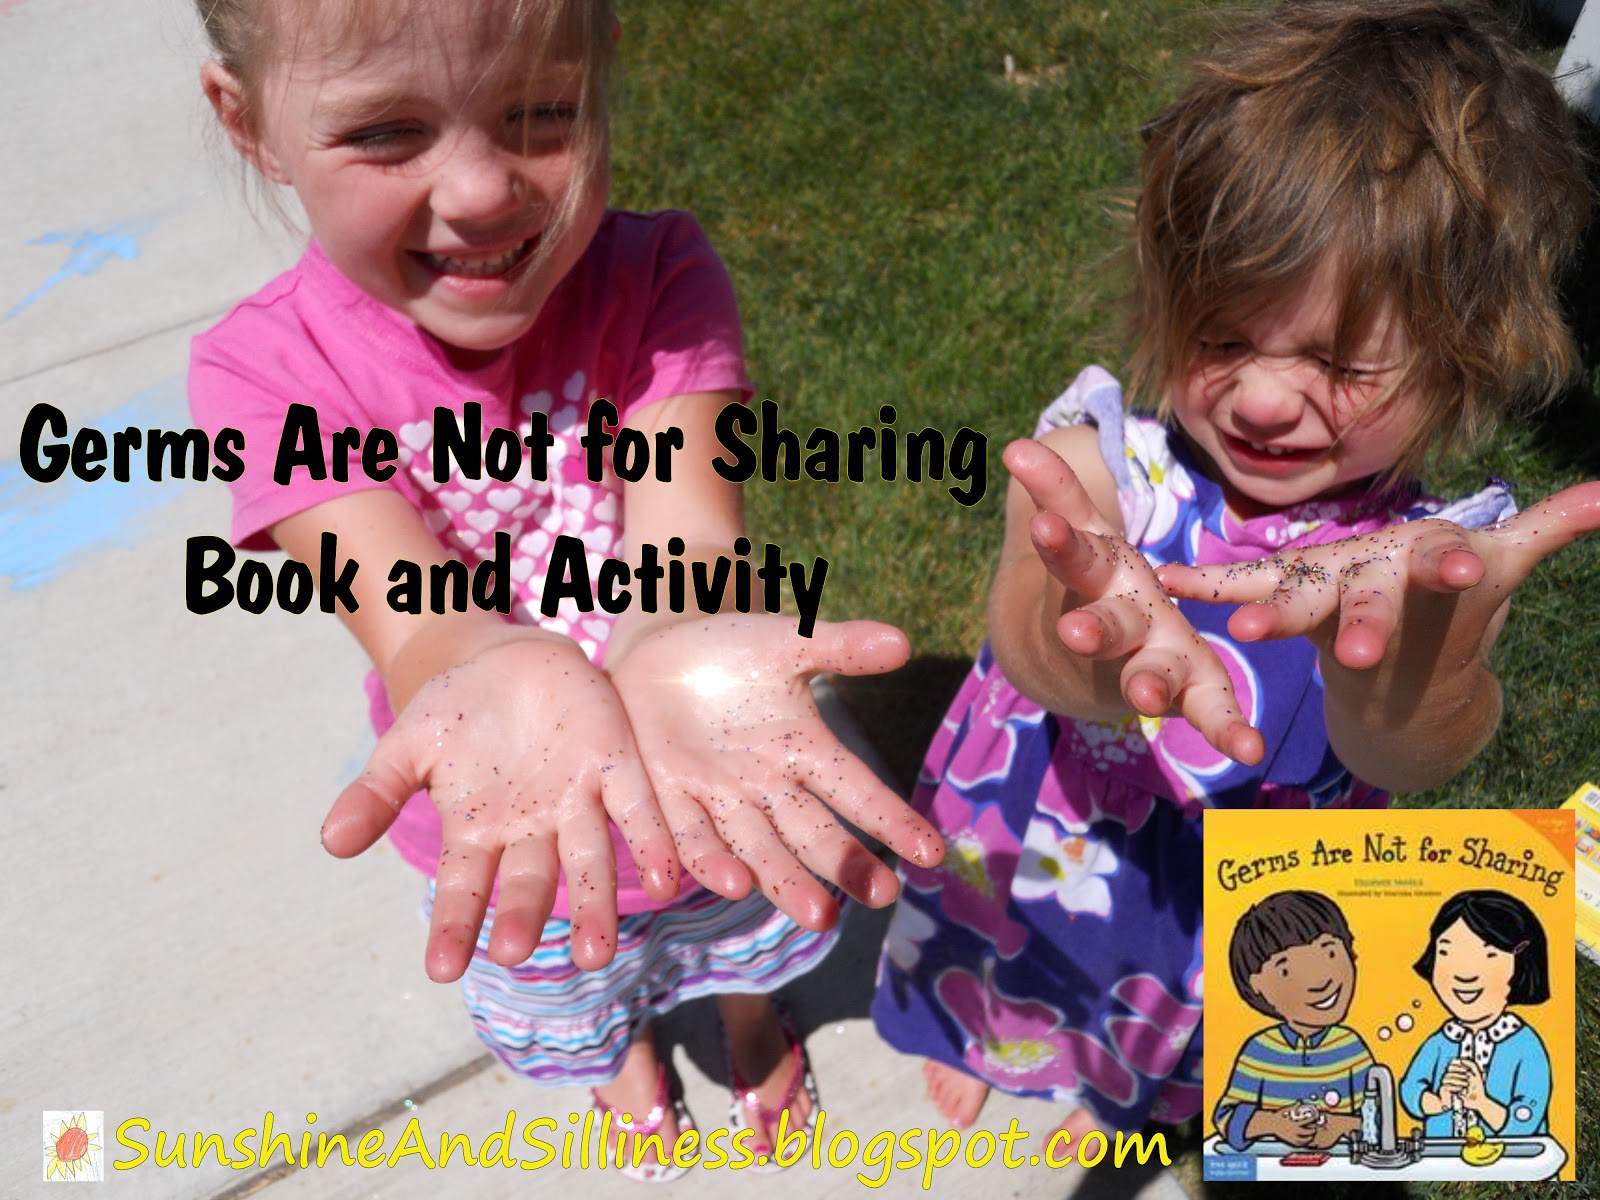 sunshine-and-silliness-mom-school-germs-are-not-for-sharing-by